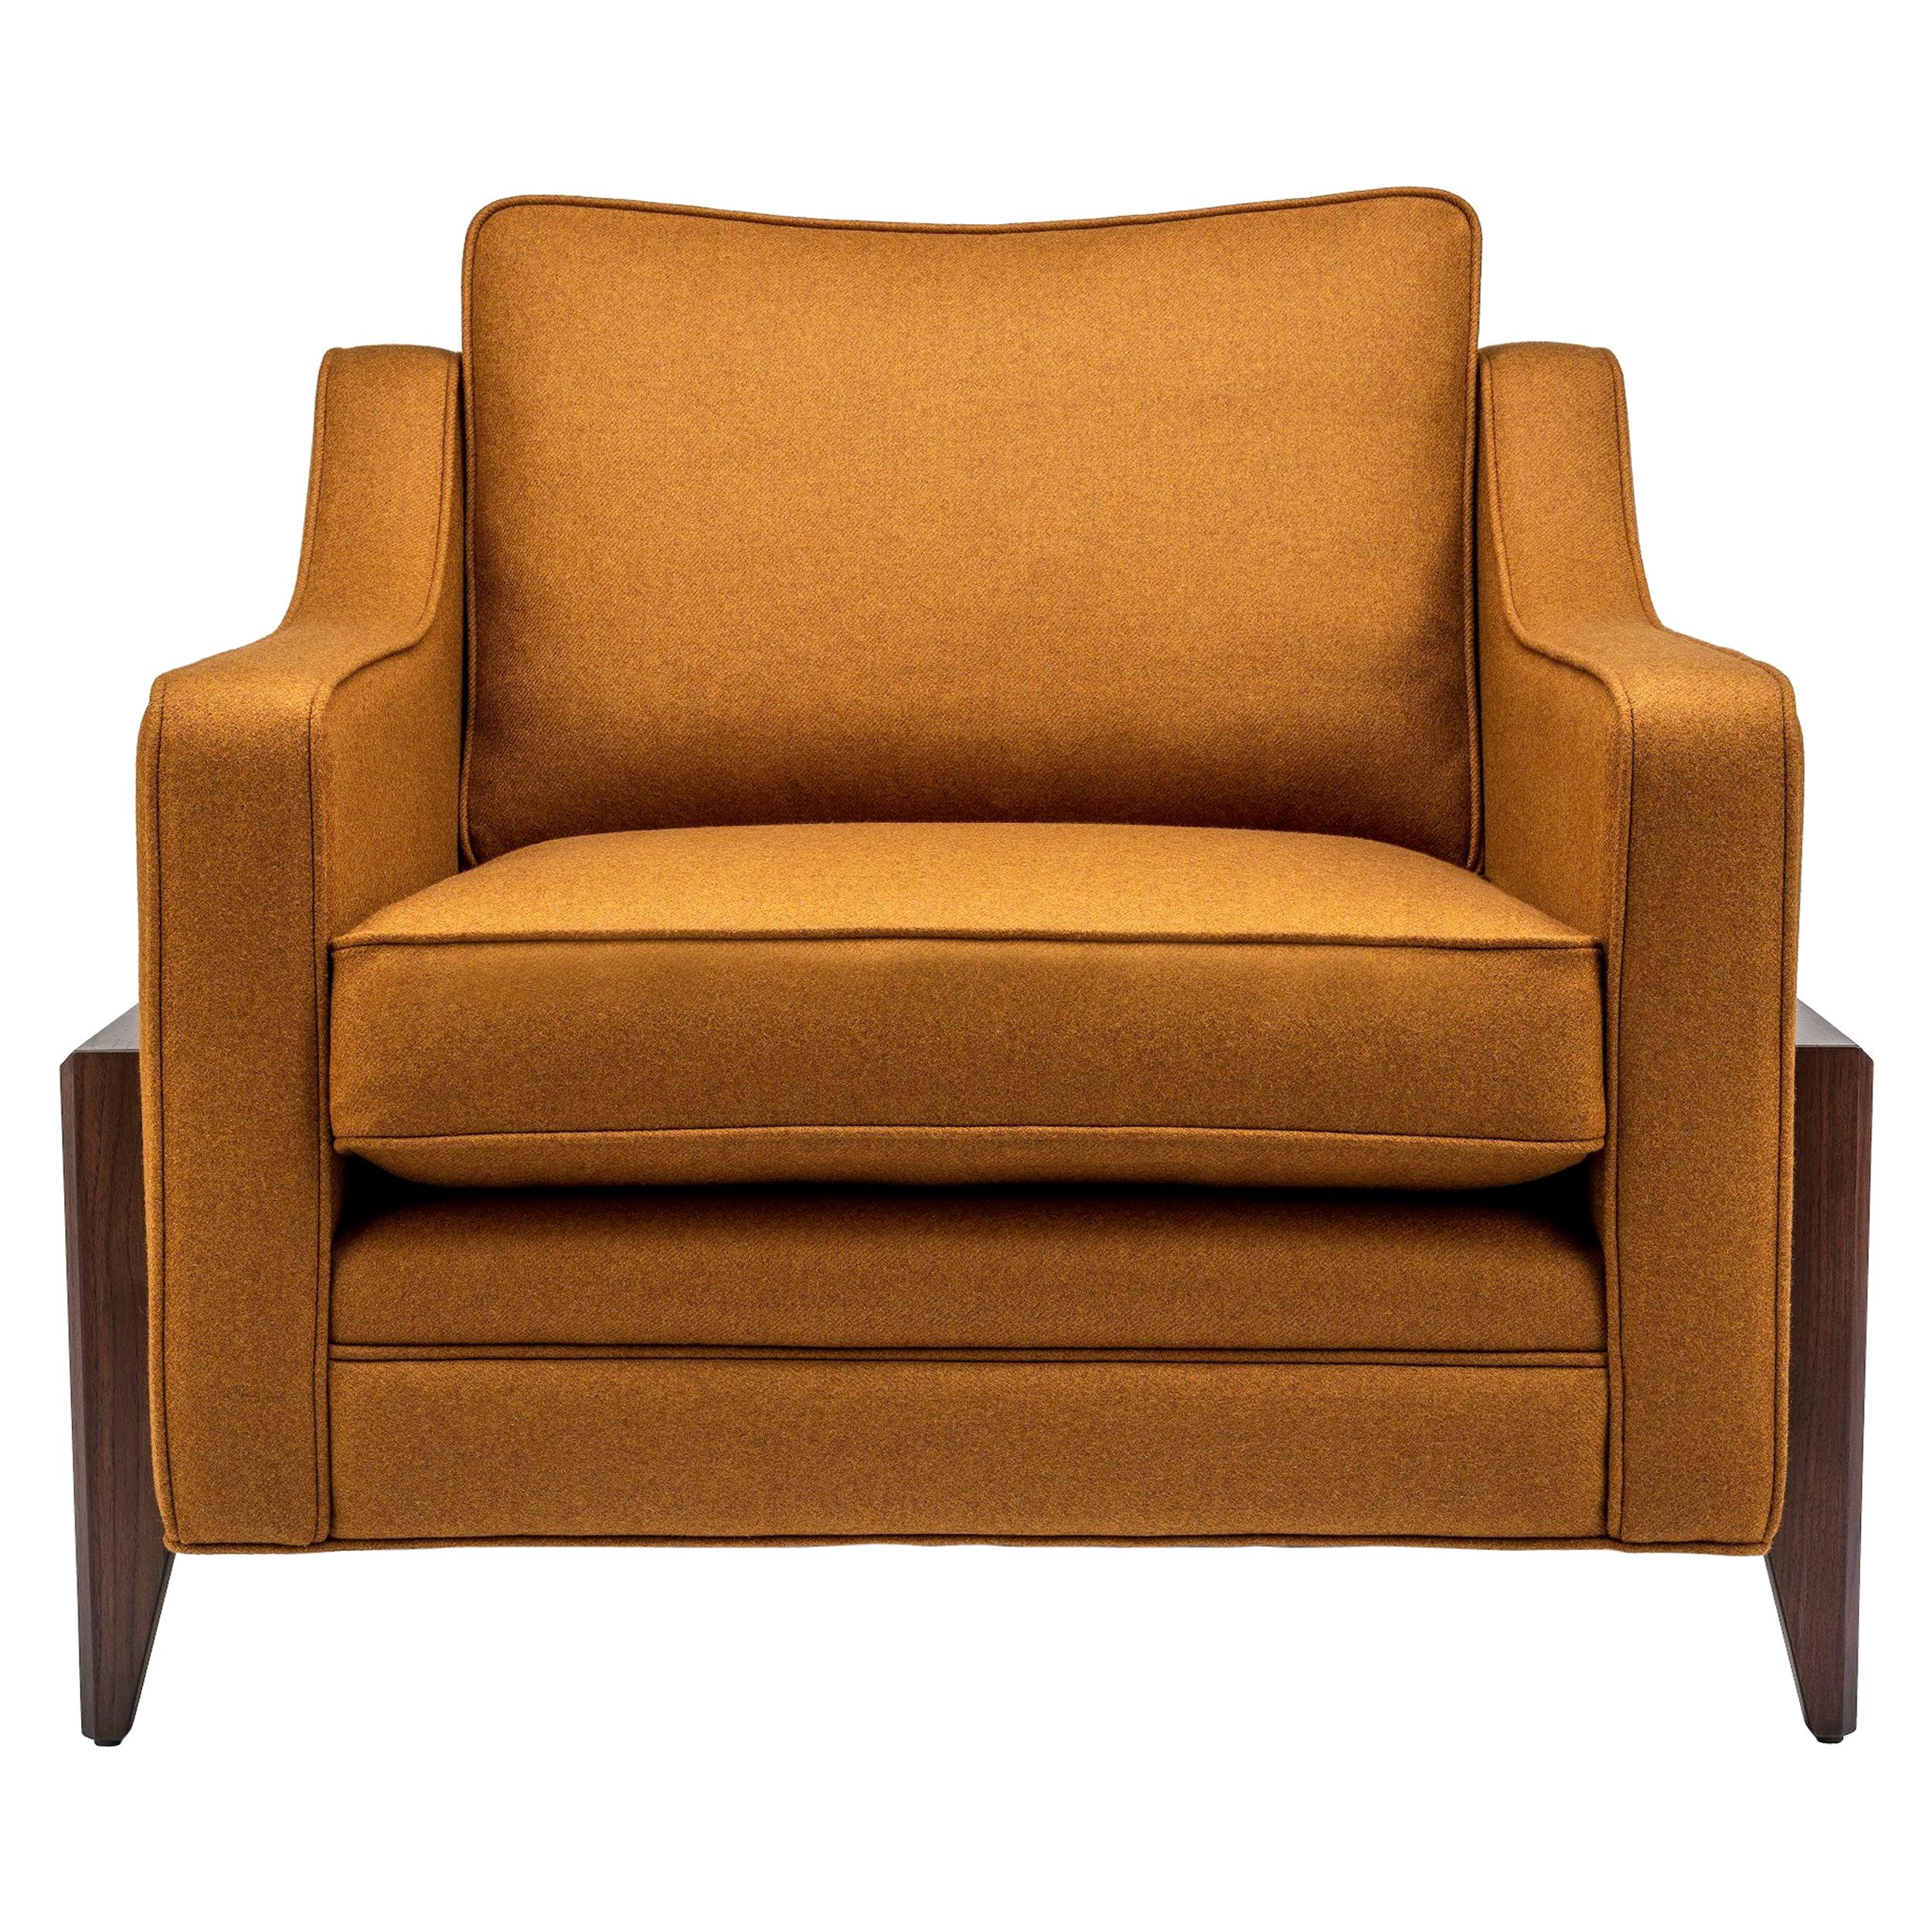 Contemporary Reposer Special Edition Chair in British Wool and Walnut Legs